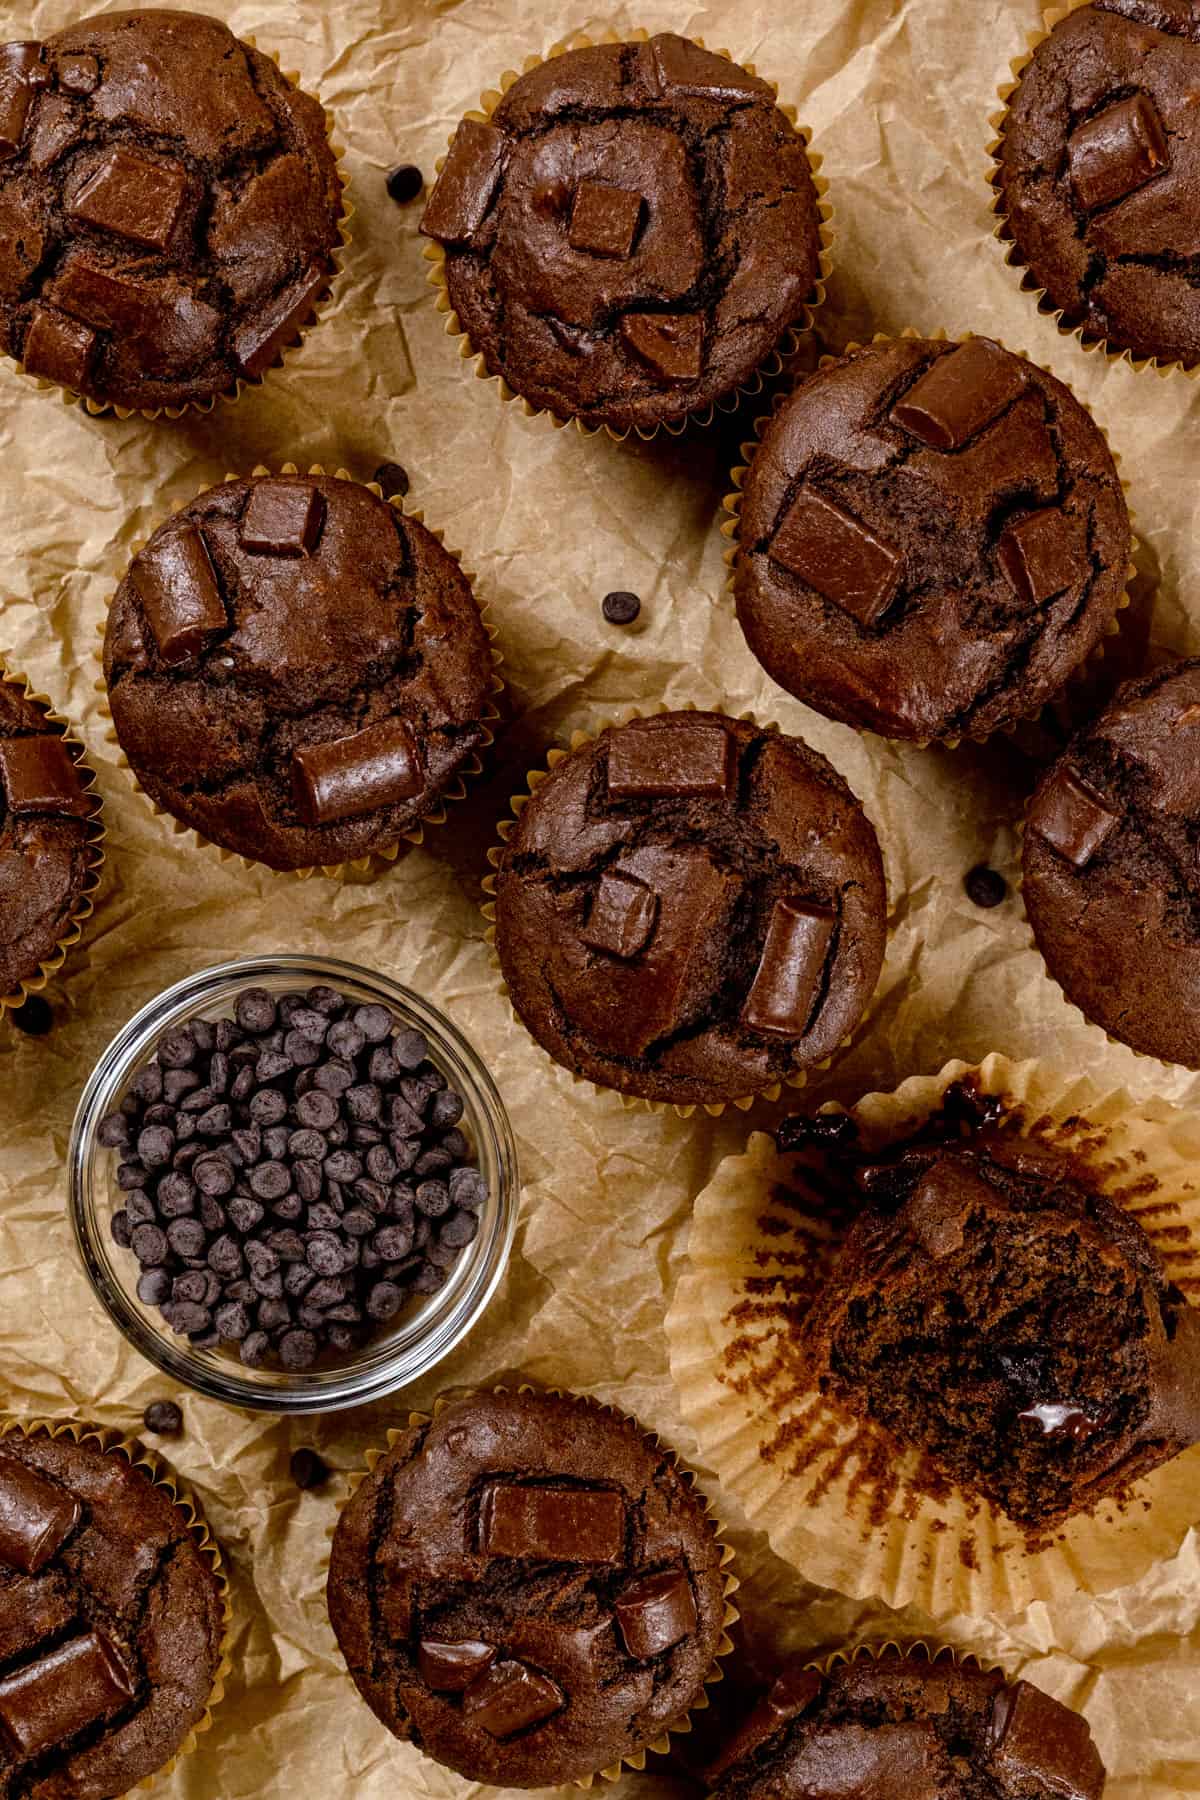 Overview of chocolate muffins on a wrinkled parchment paper. A bowl of mini chocolate chips is next to the muffins.